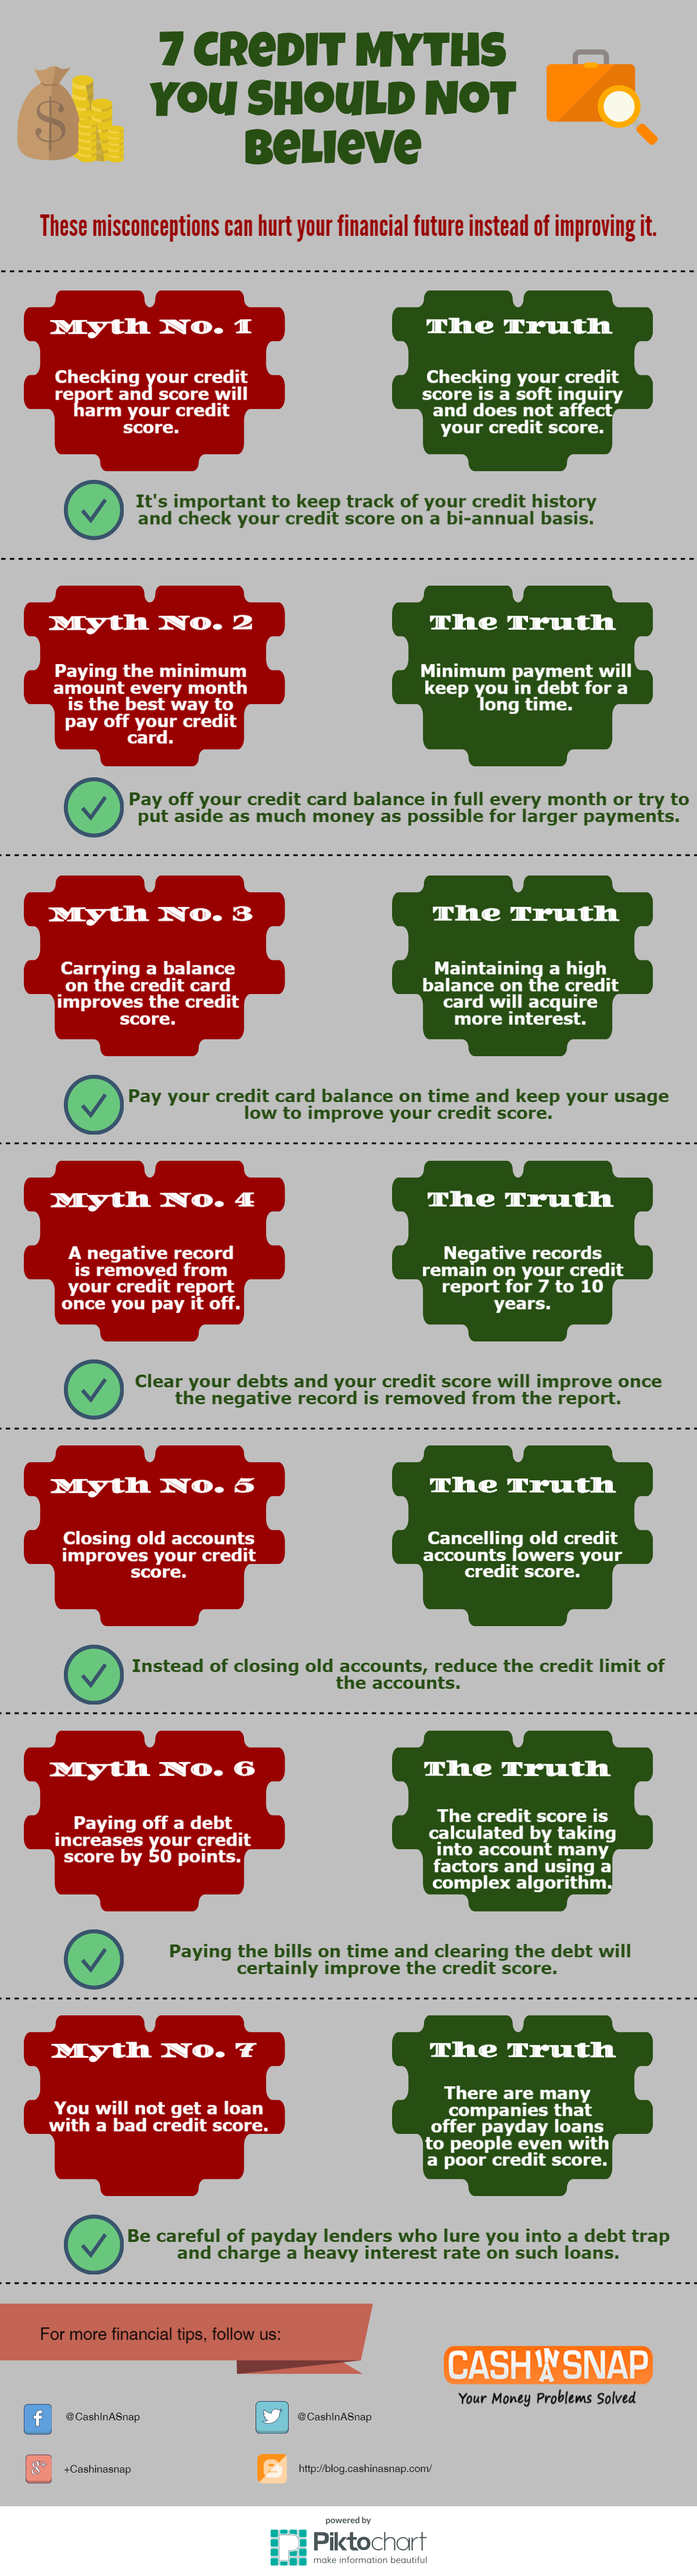 7 Credit Myths You Should Not Believe